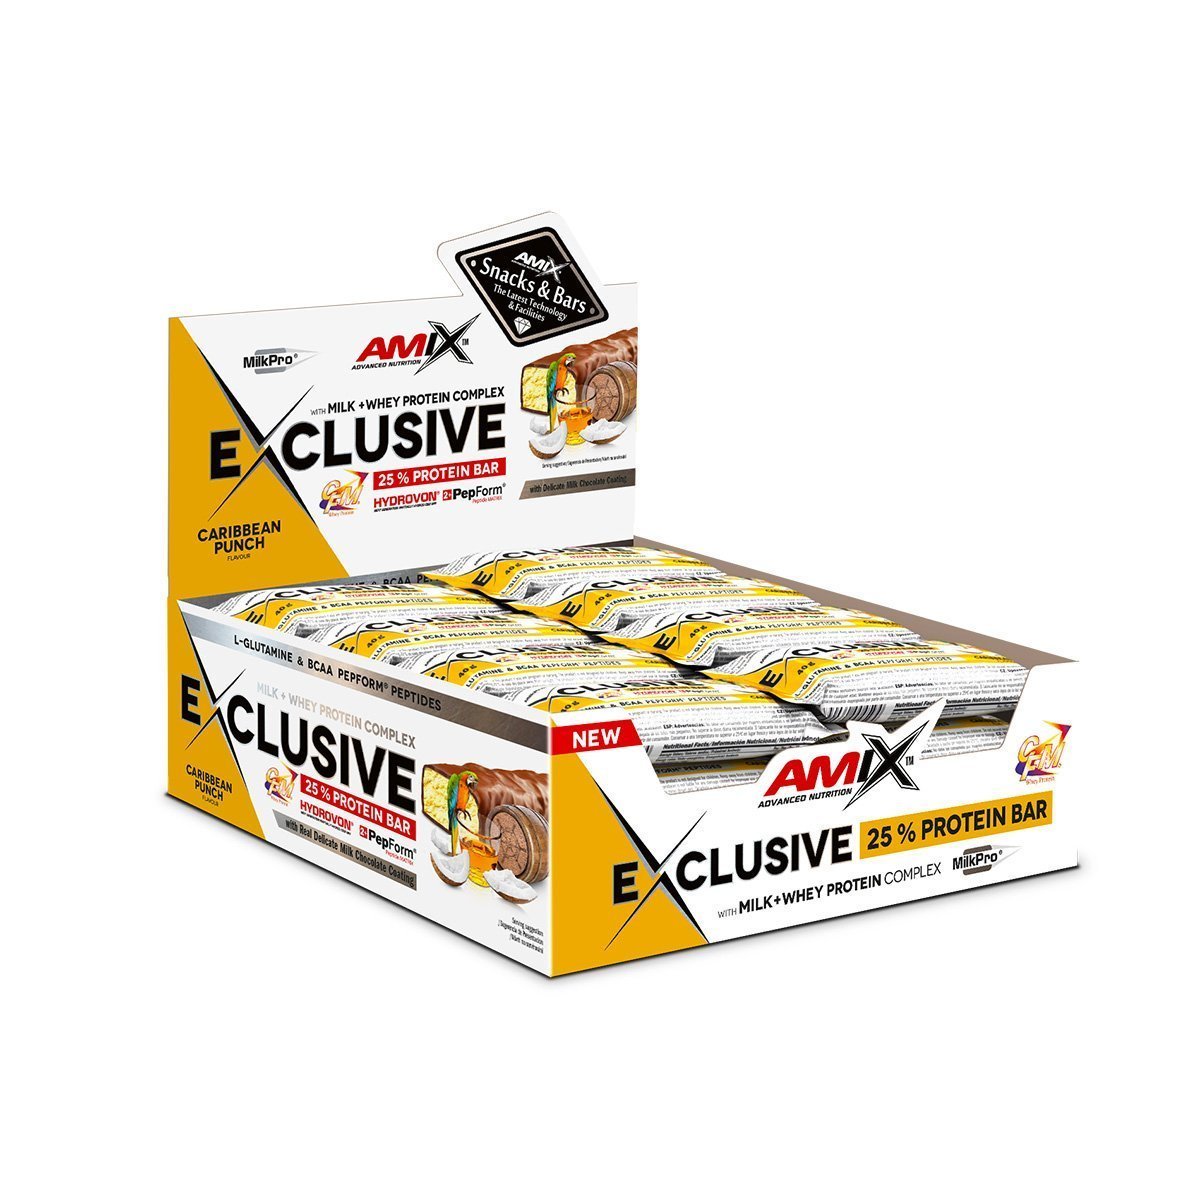 Amix Exclusive Protein Bar - 24x40g - Carribean Punch